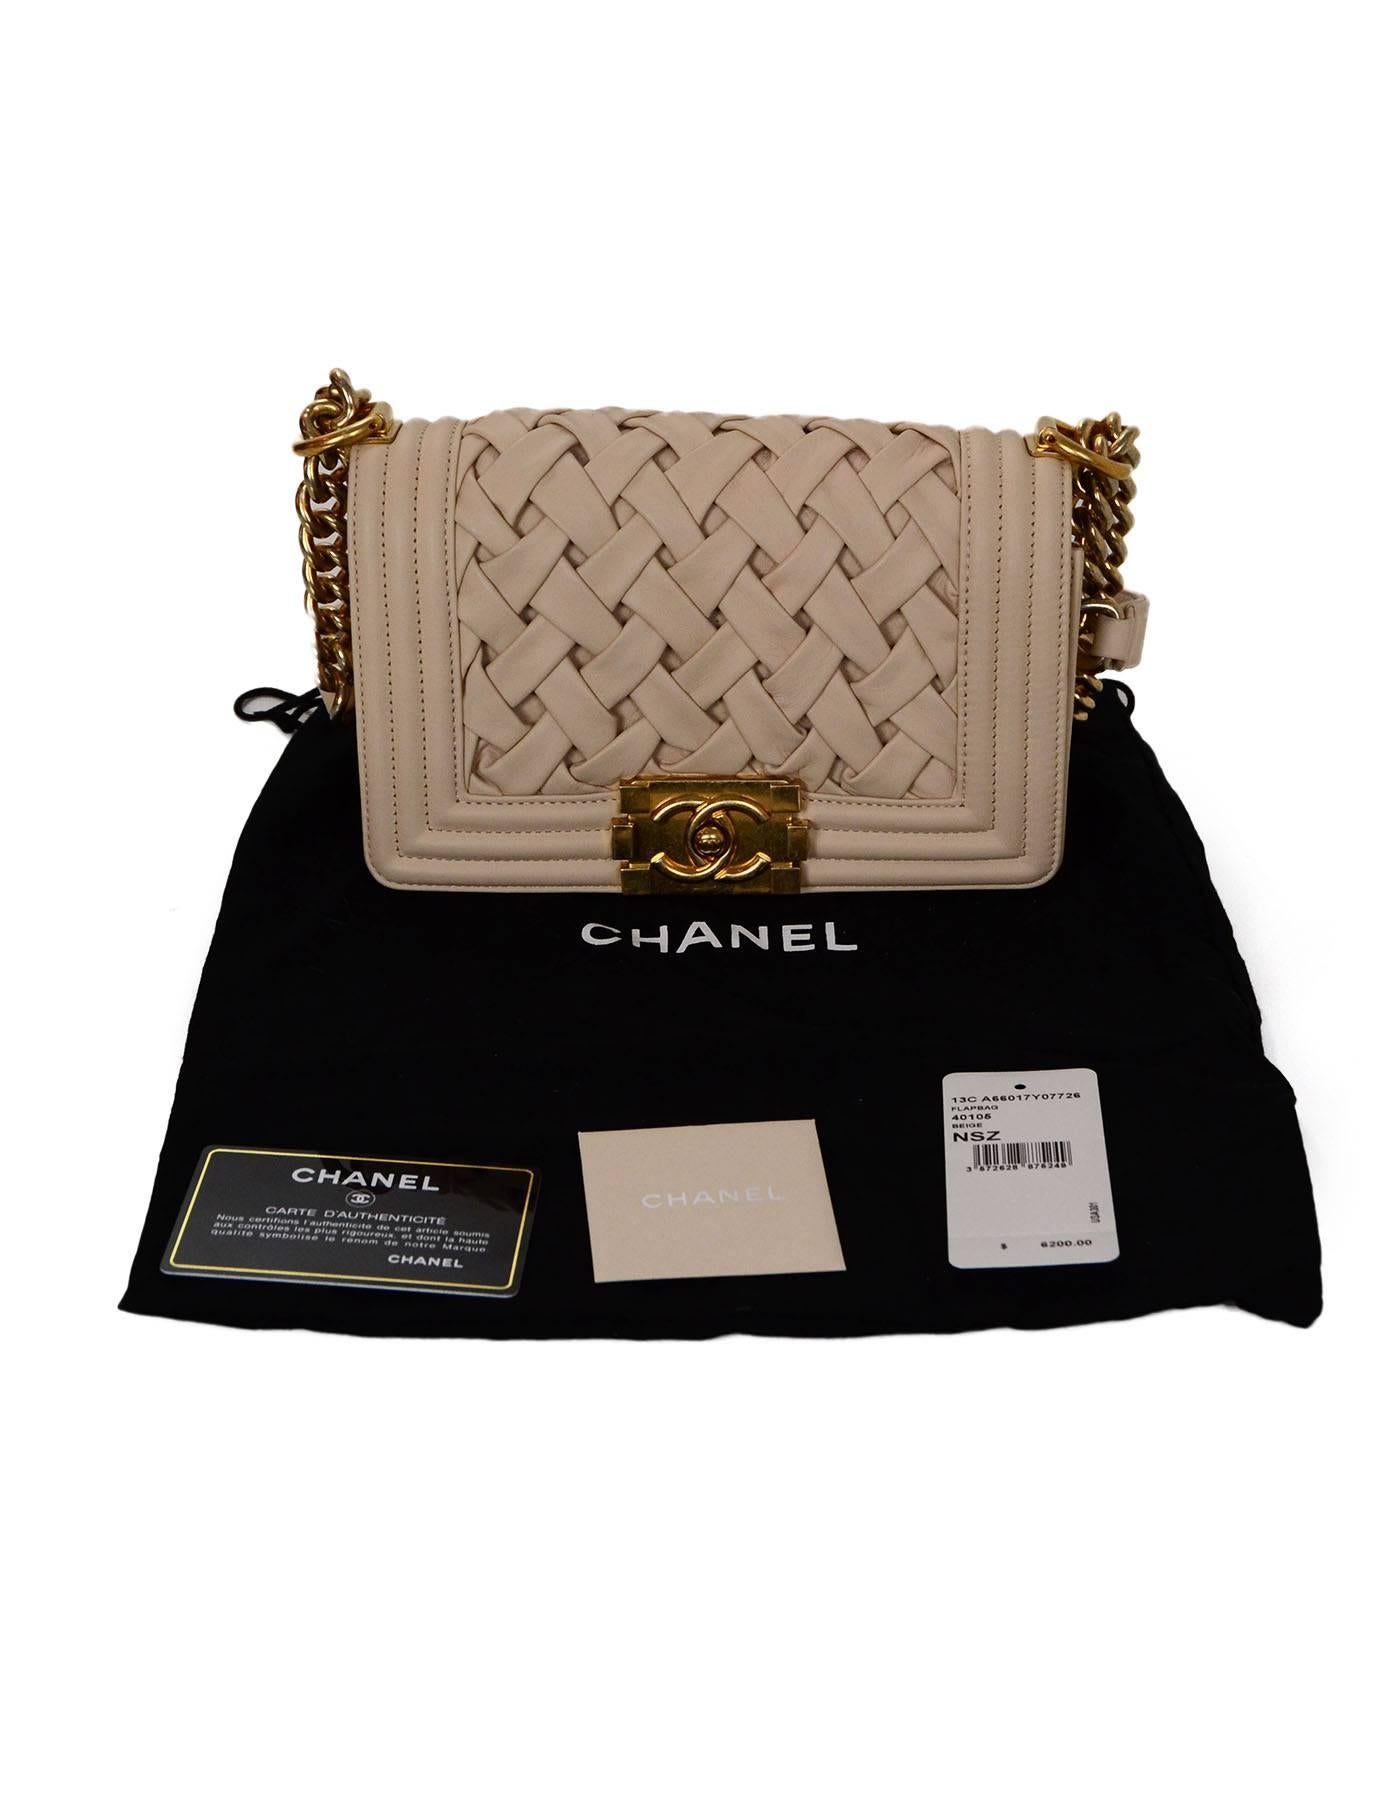 Chanel Limited Edition Beige Woven Leather Chateau Boy Bag GHW rt. $6, 200 3